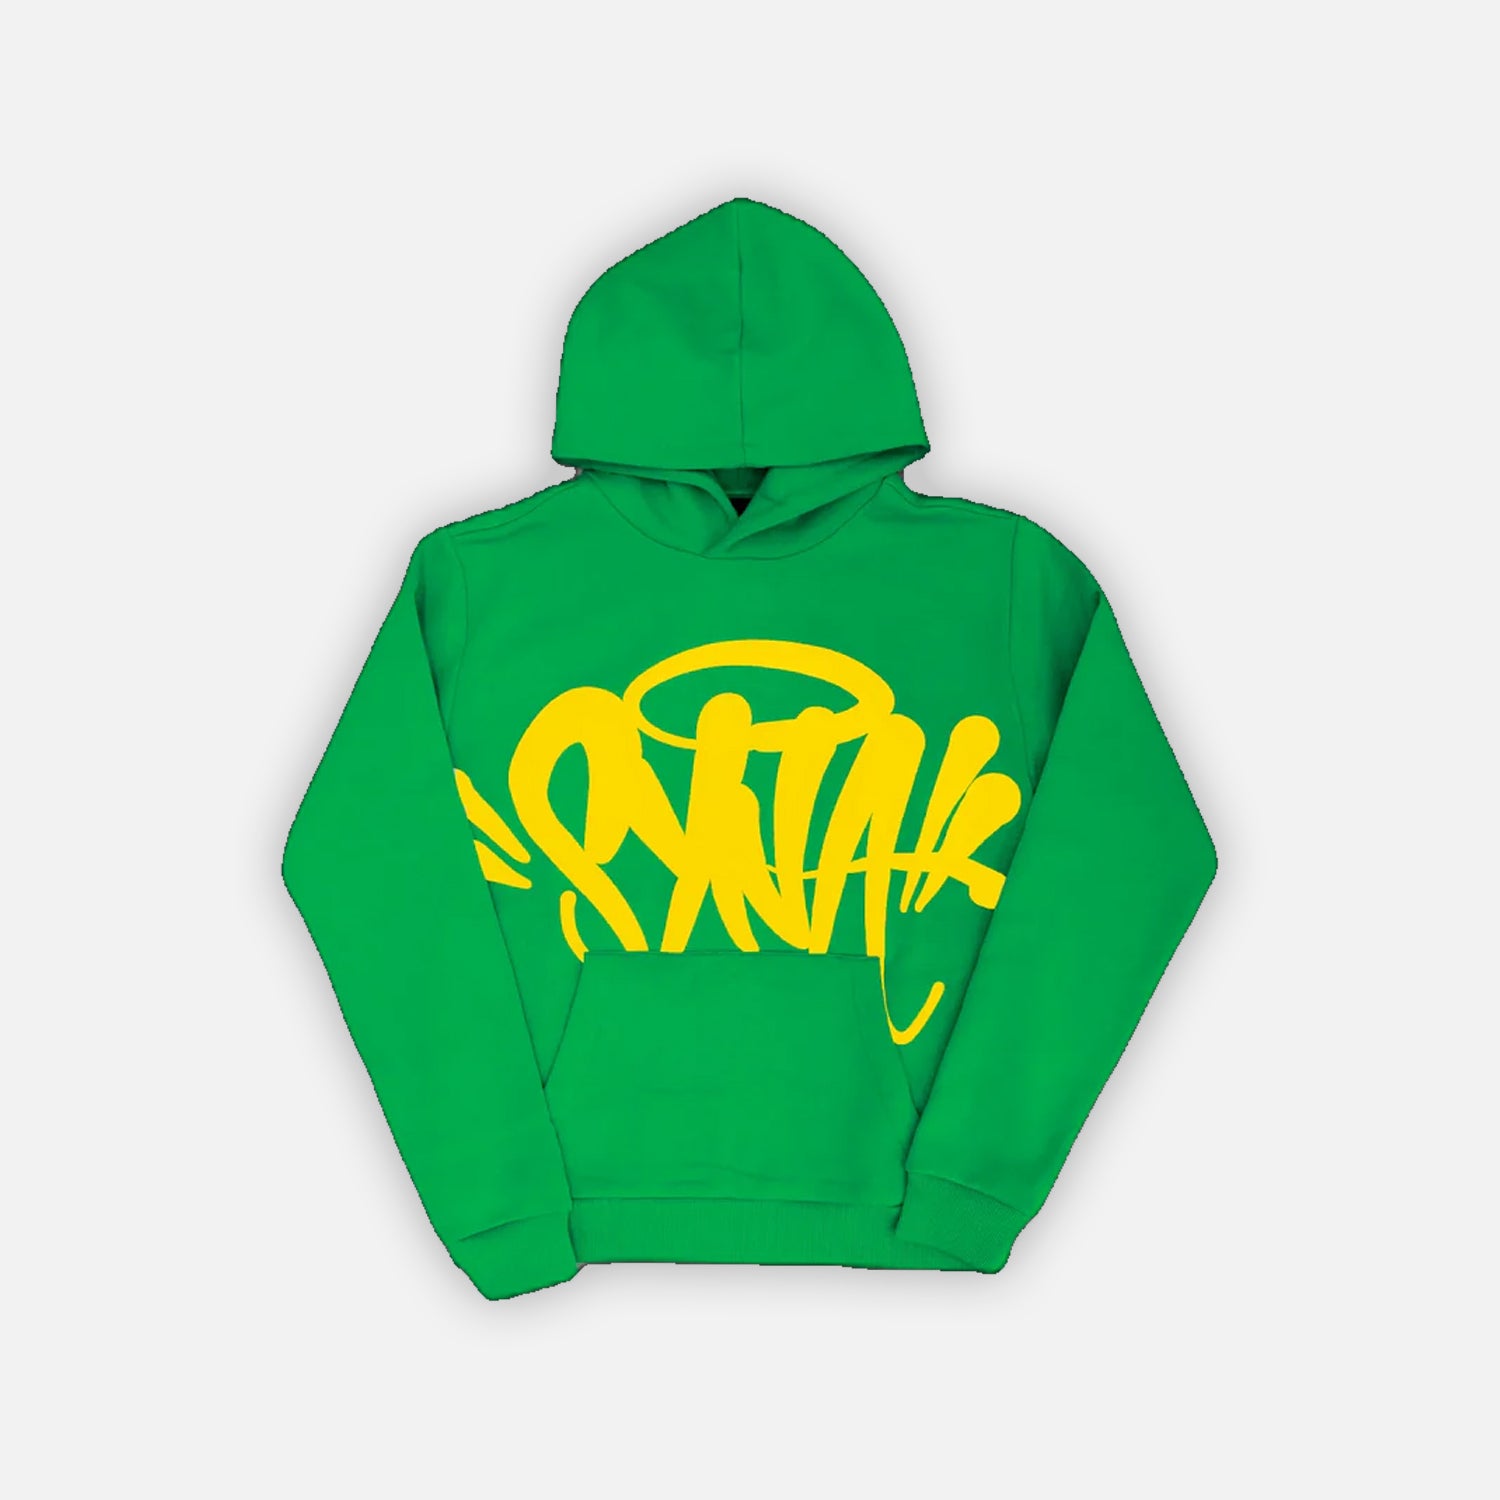 Syna World Team Hoodie + Short Twinset - Green / Yellow